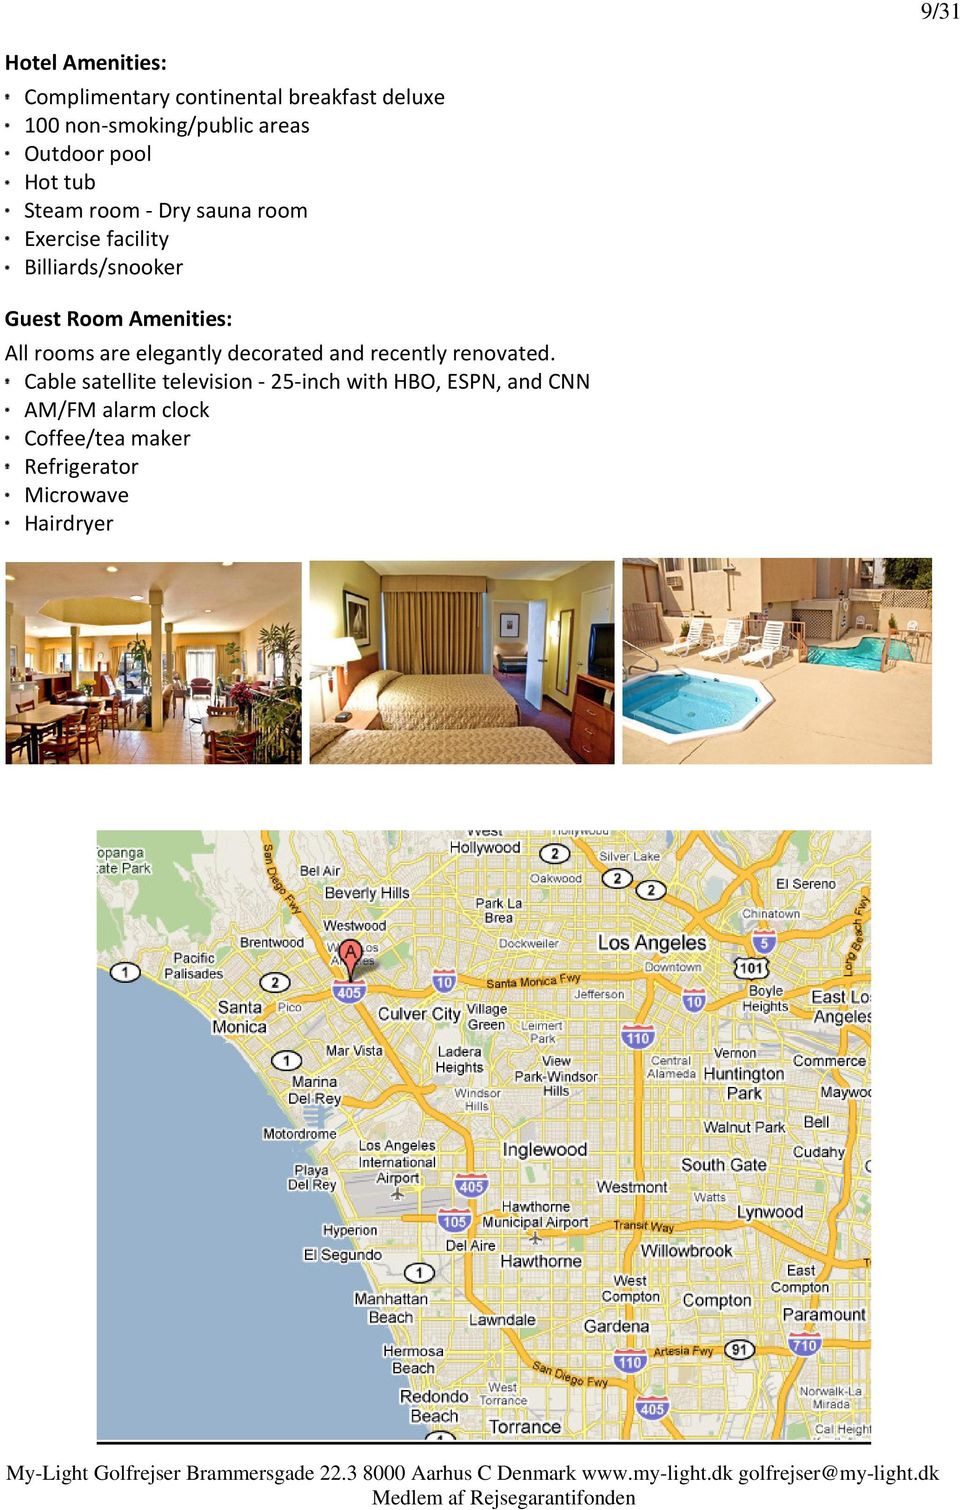 Amenities: All rooms are elegantly decorated and recently renovated.